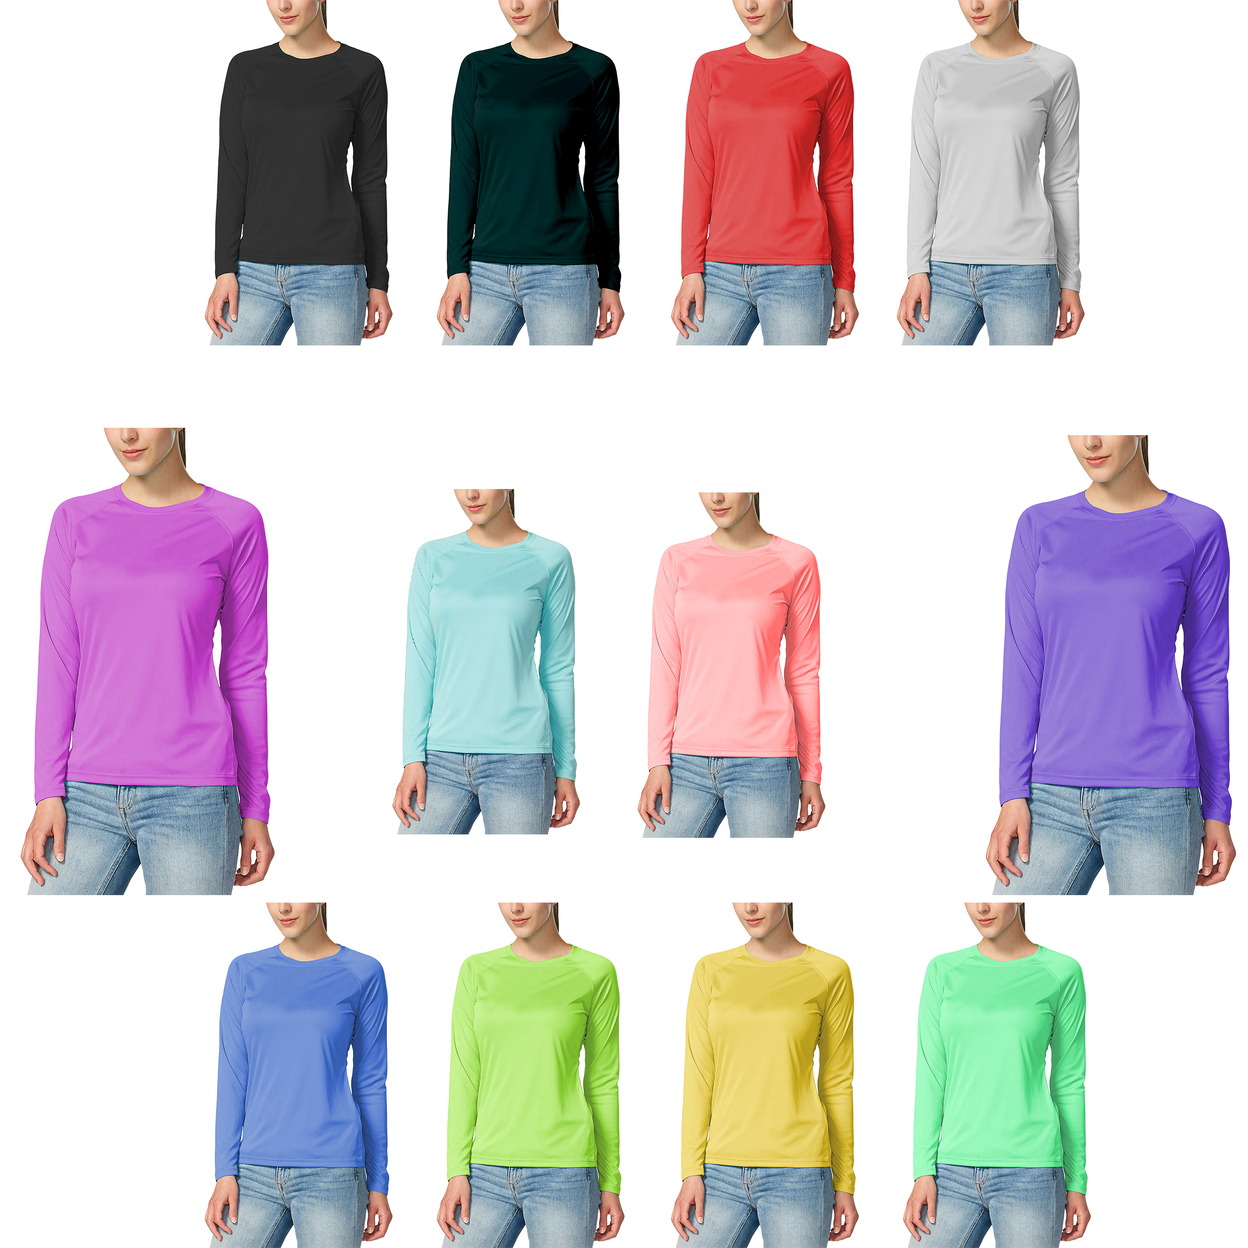 4-Pack: Women's Dri-Fit Moisture-Wicking Breathable Long Sleeve T-Shirt - Small